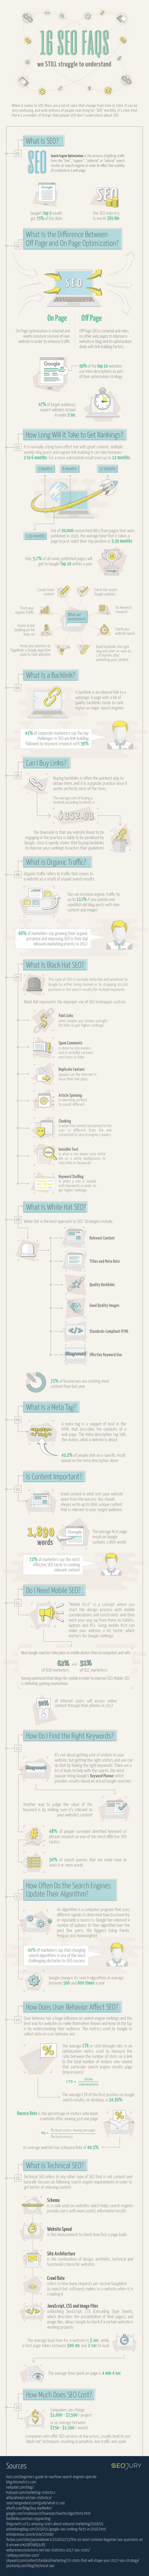 16-SEO-FAQs-infographic.png